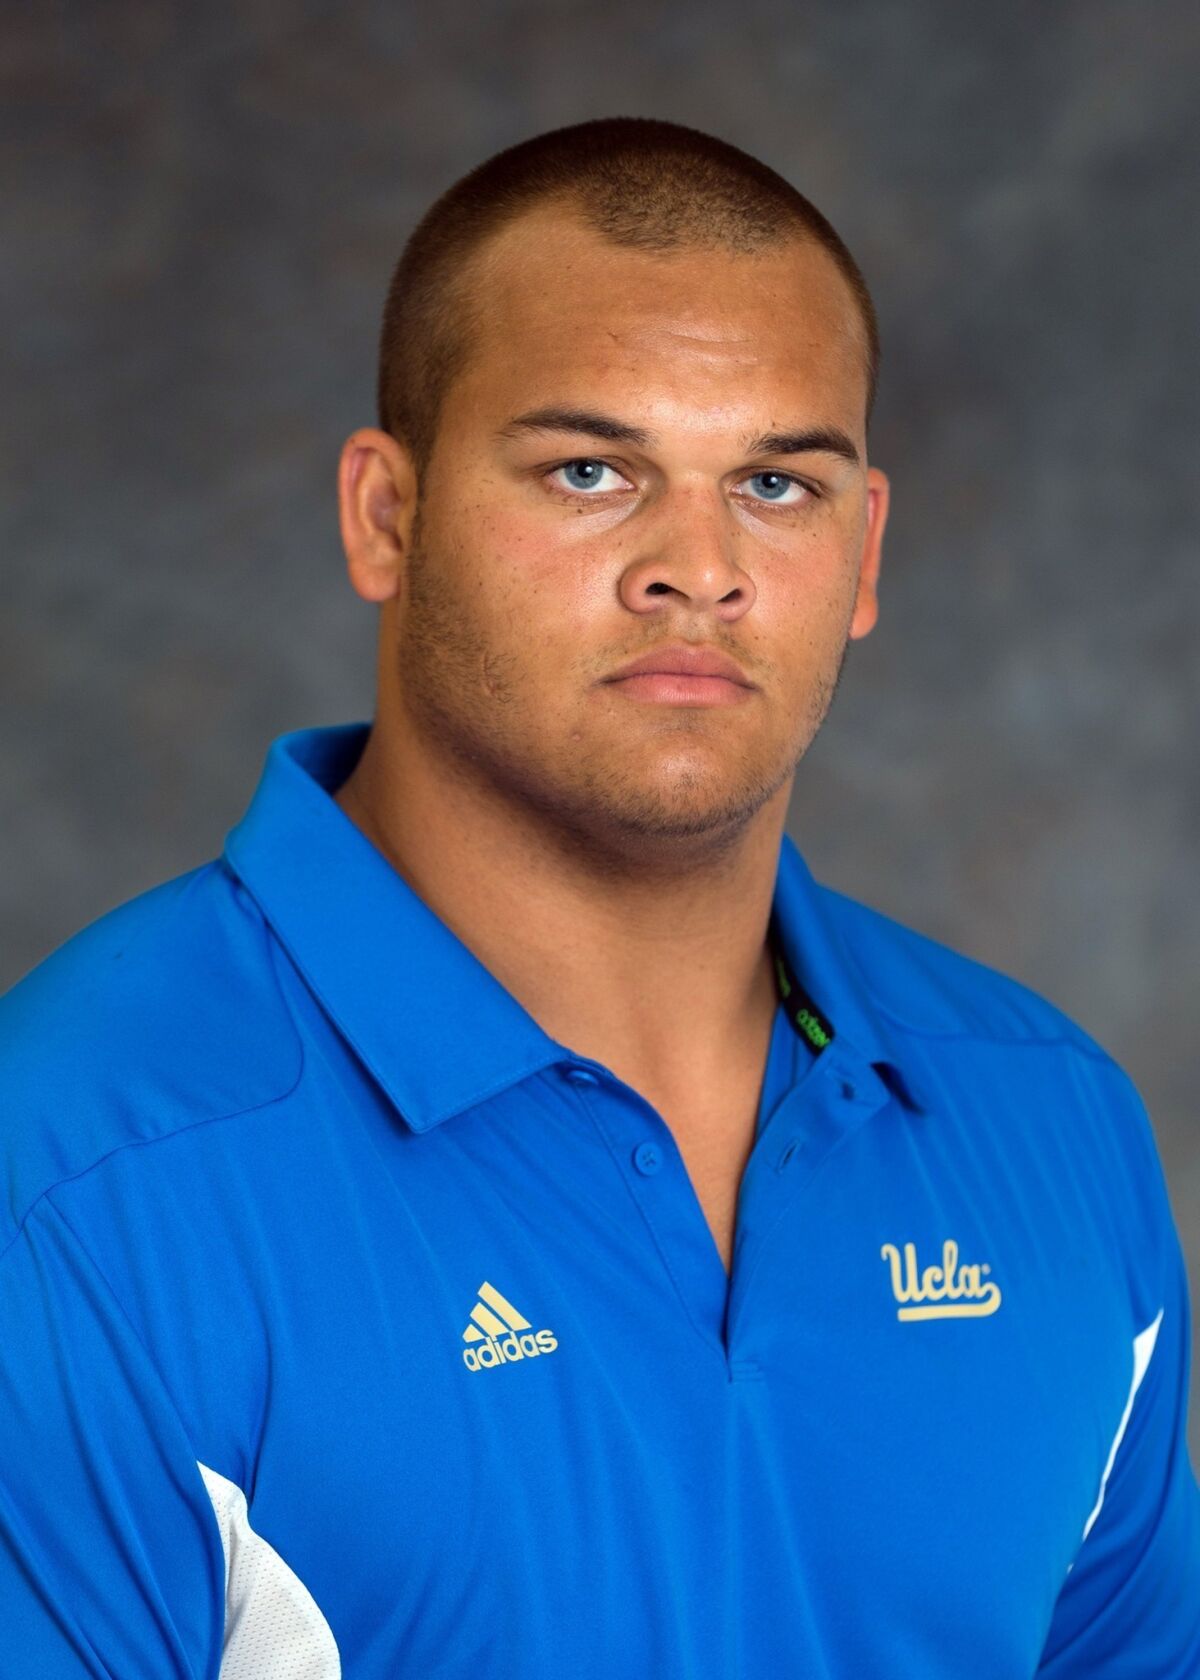 UCLA freshman defensive end Eddie Vanderdoes likely will see extensive playing time for the Bruins this season.